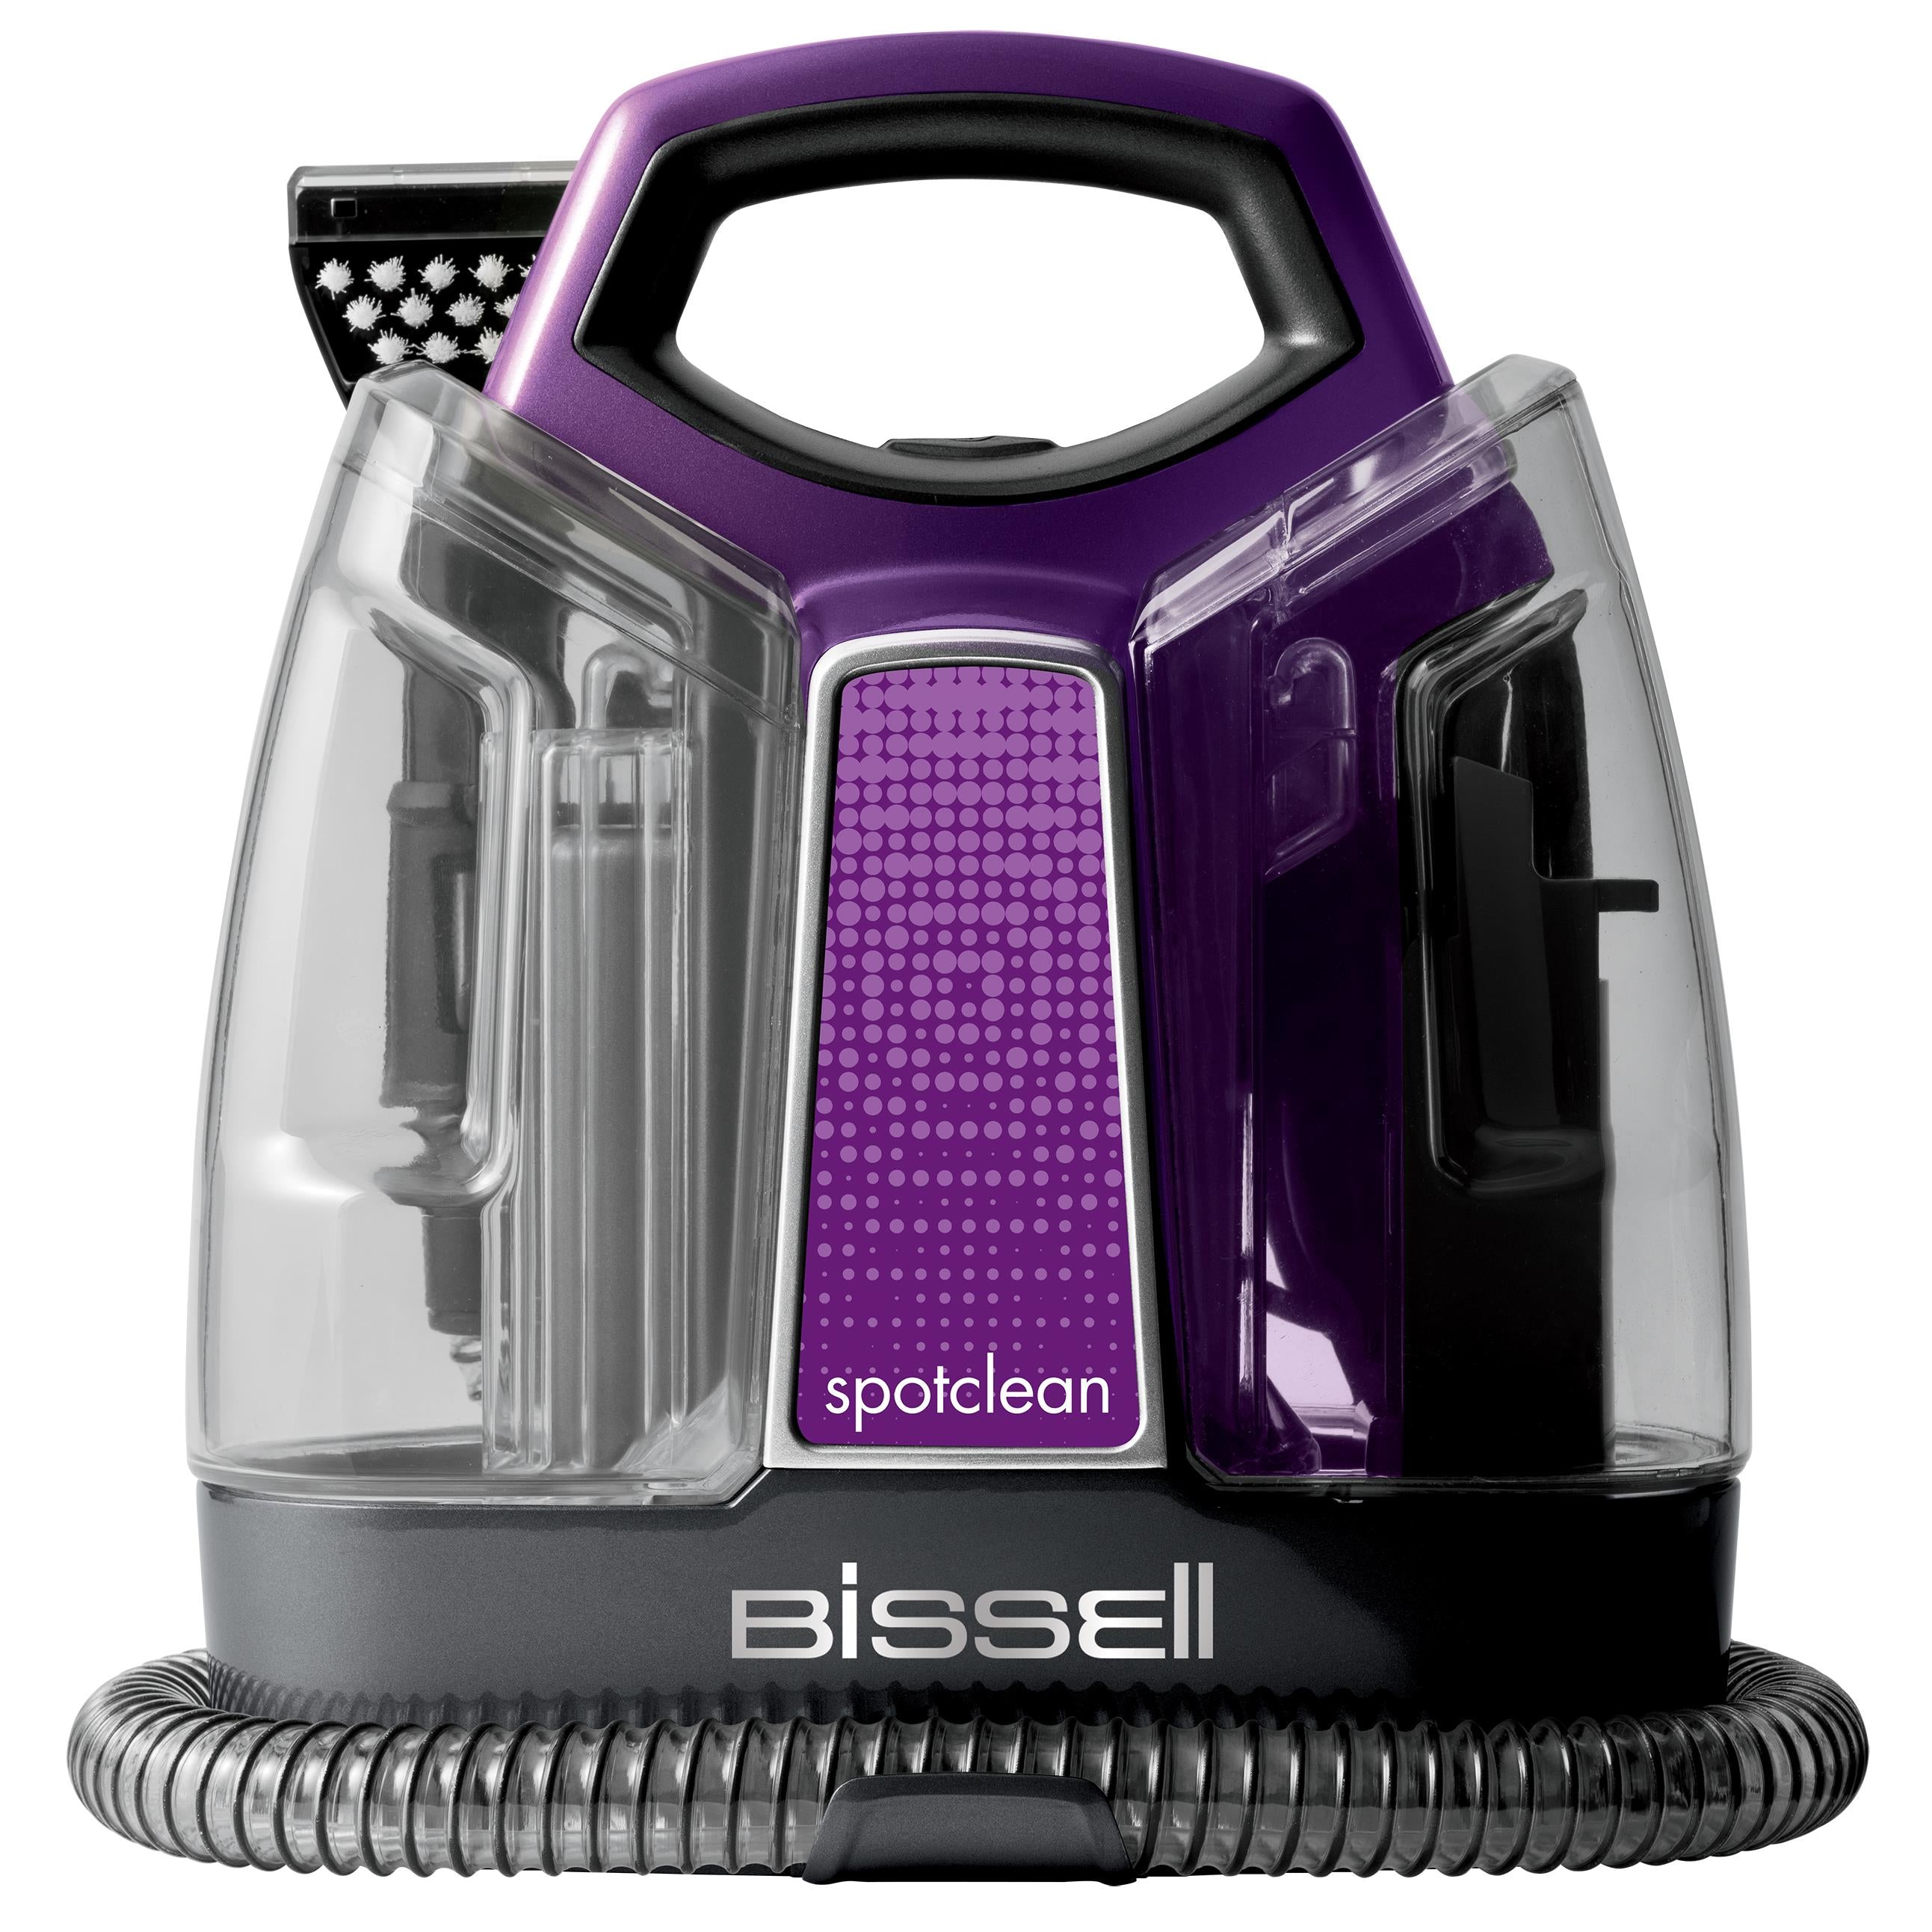 Bissell SpotClean Portable and Upholstery Carpet Washer 36984